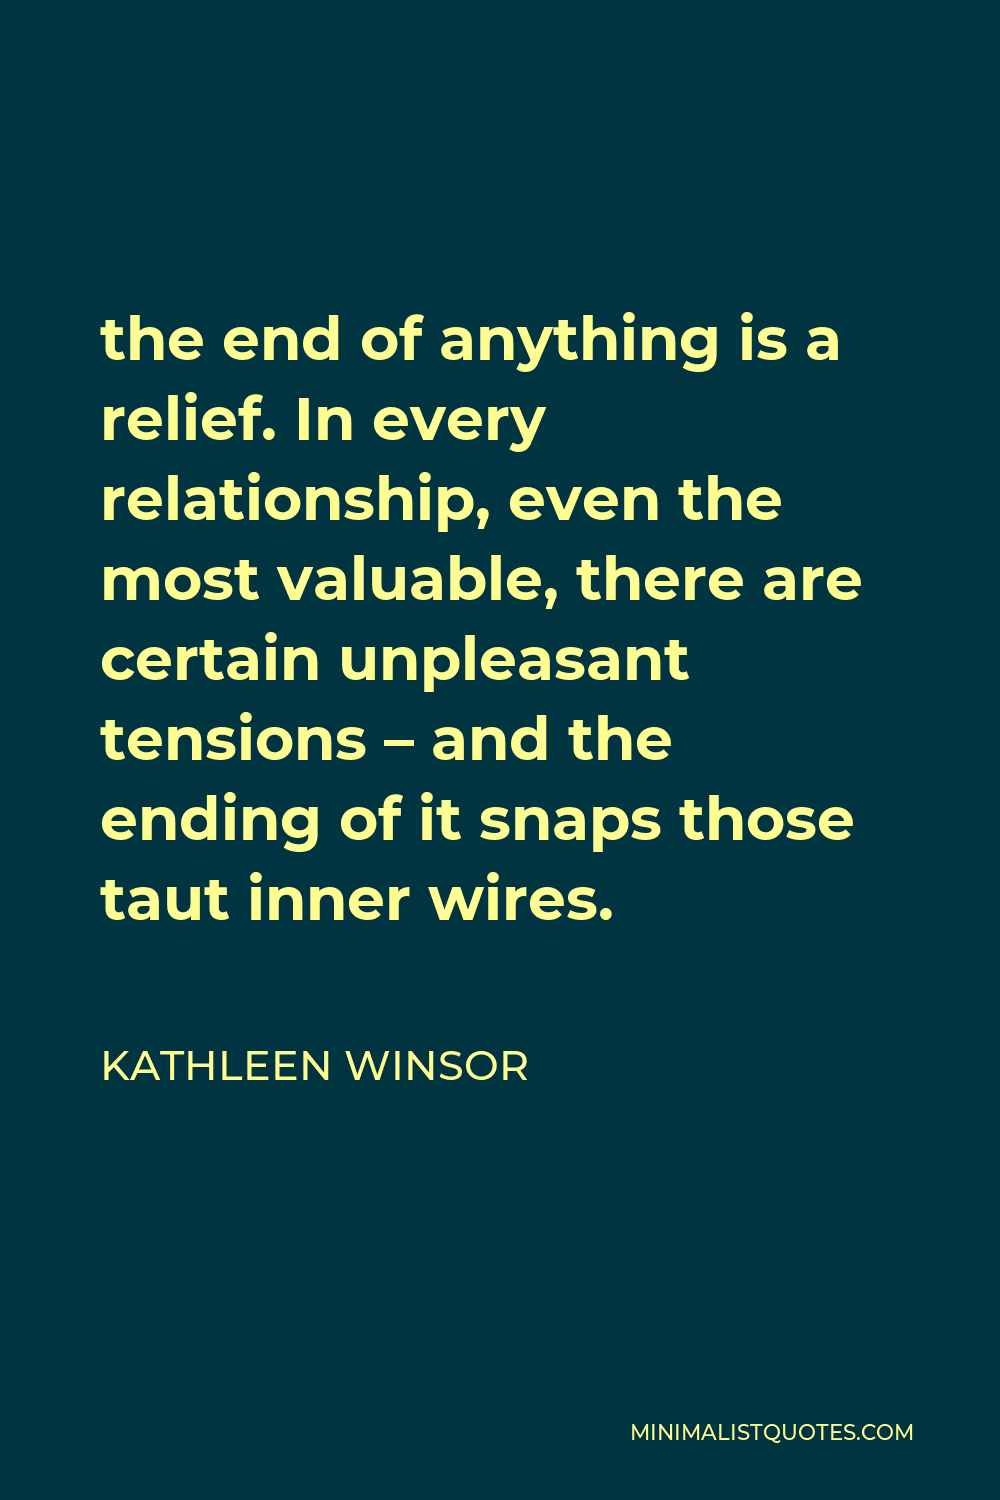 Kathleen Winsor Quote - the end of anything is a relief. In every relationship, even the most valuable, there are certain unpleasant tensions – and the ending of it snaps those taut inner wires.